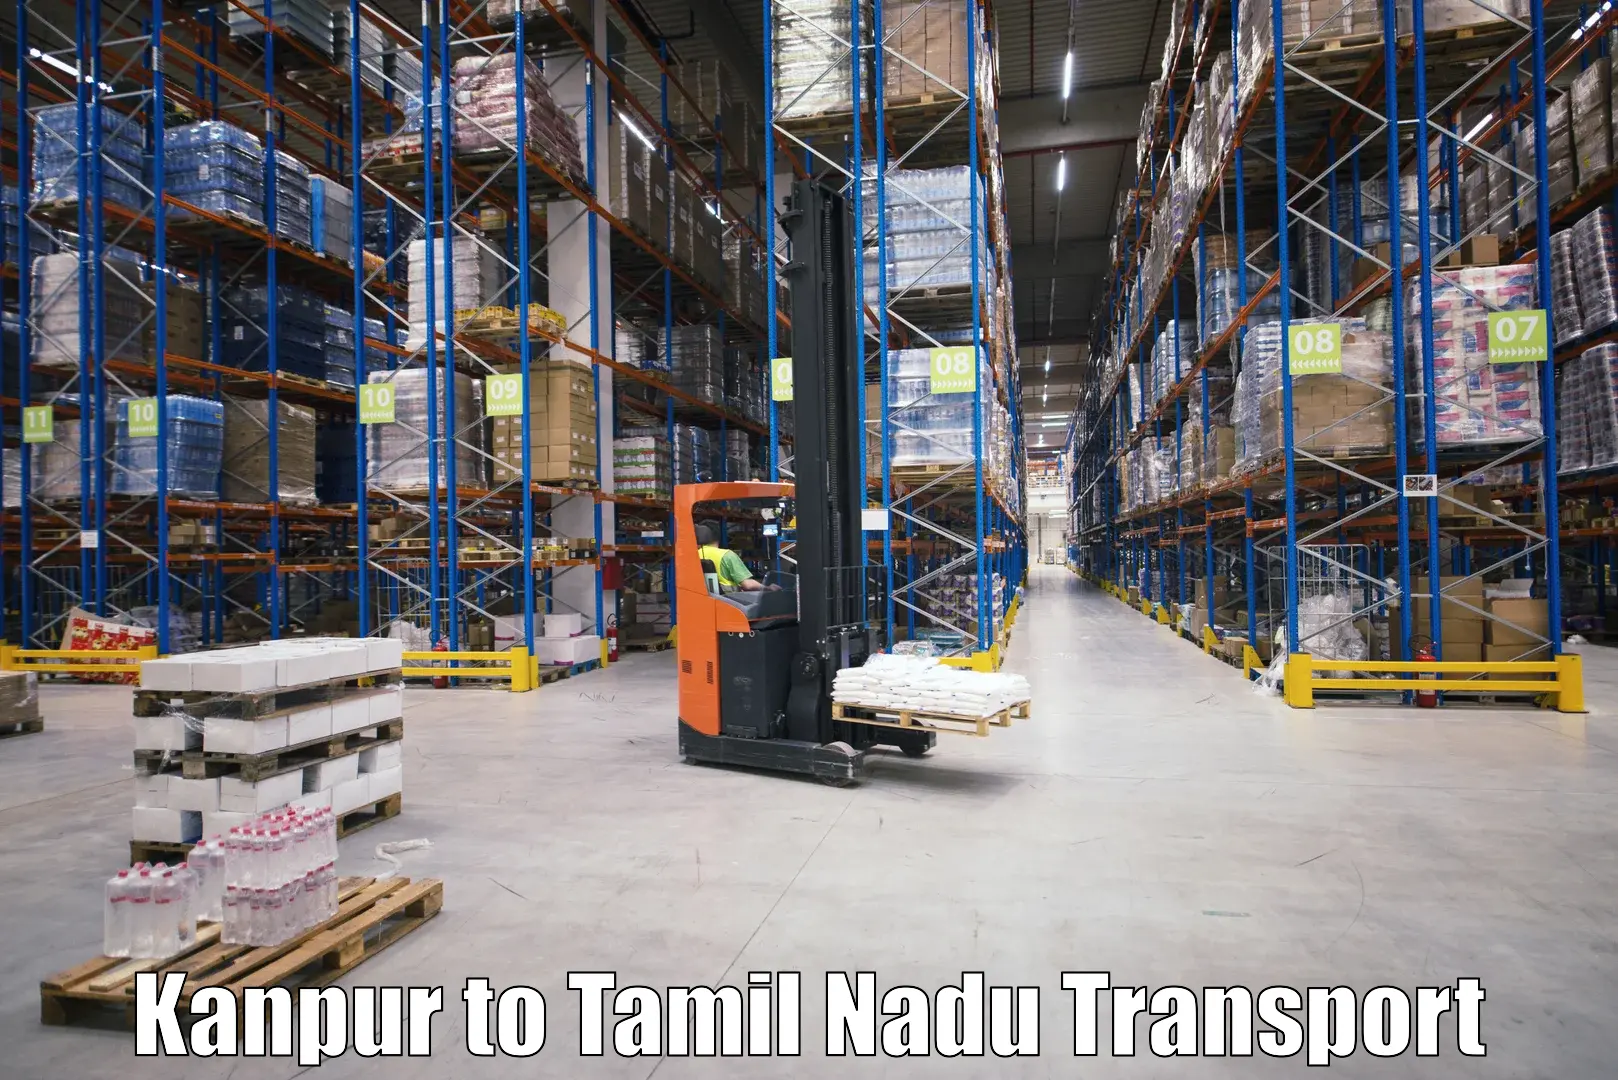 Express transport services Kanpur to Vellore Institute of Technology